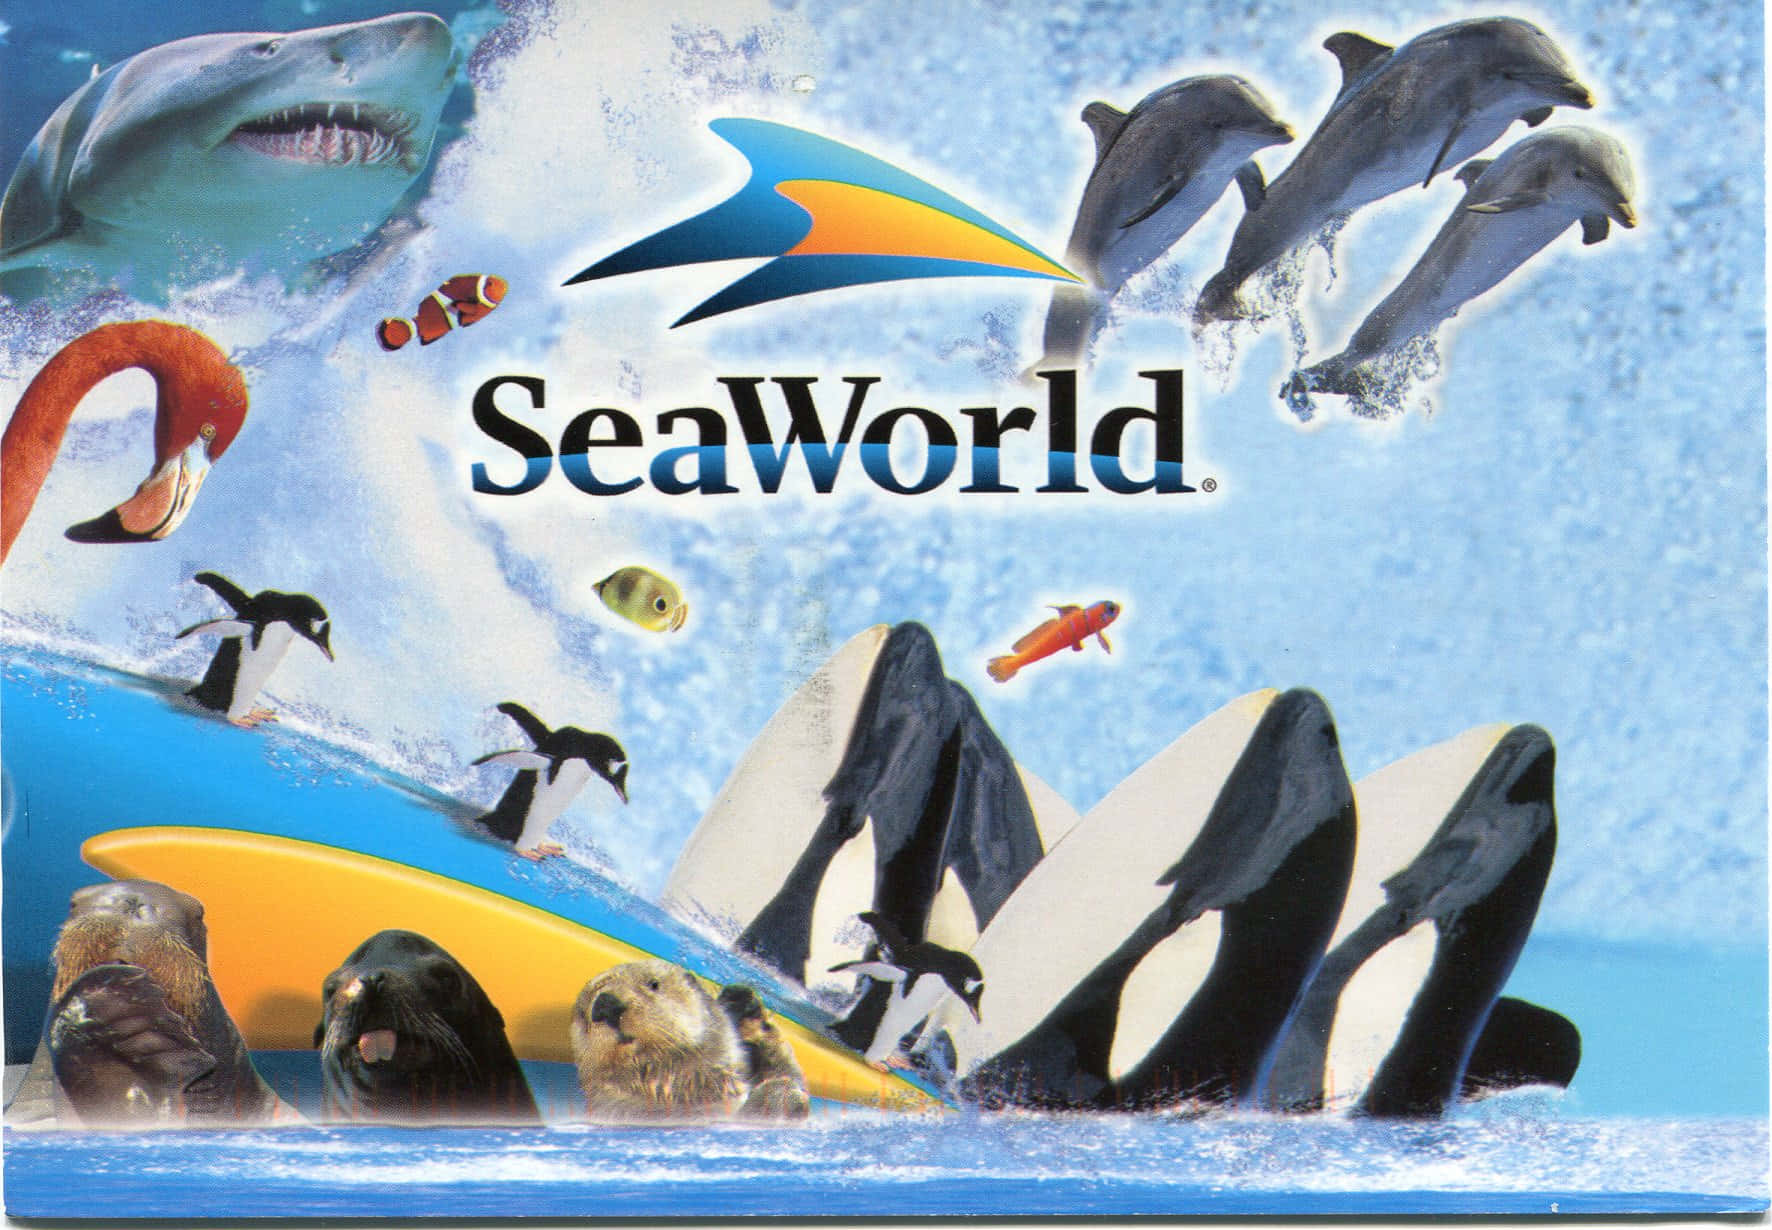 "Discover natural wonders and majestic creatures at SeaWorld"